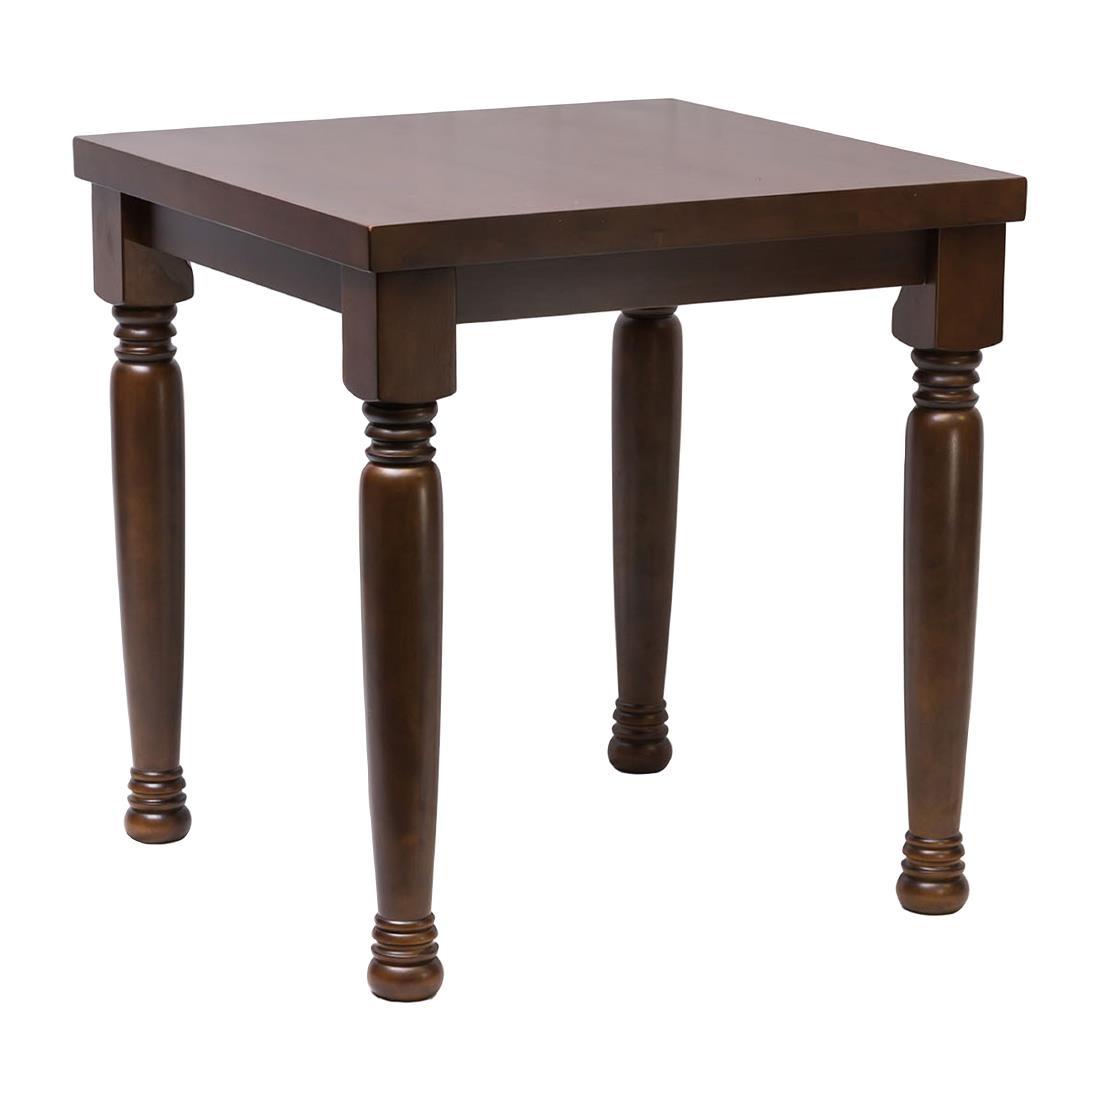 Cotswold Dark Wood Square Dining Table 700x700mm